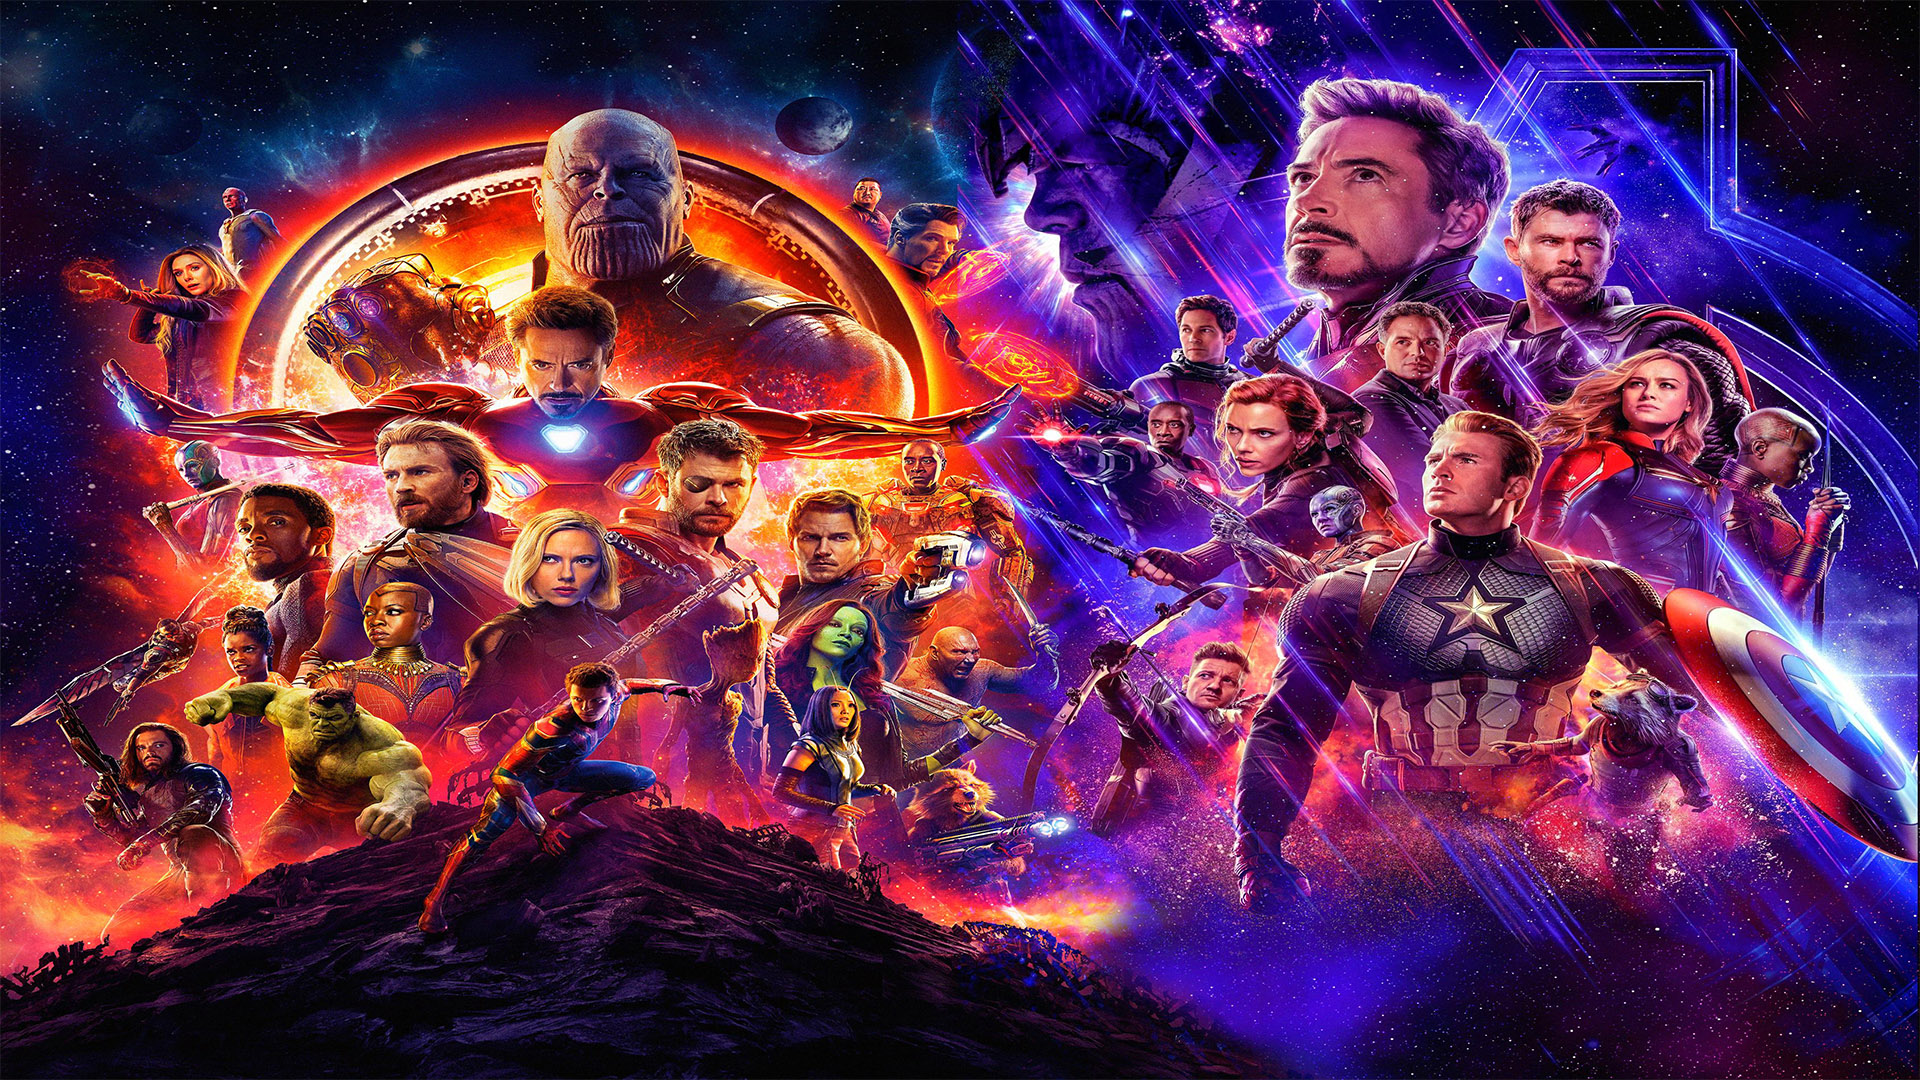 Avengers EndGame Movie Review: No Spoilers!